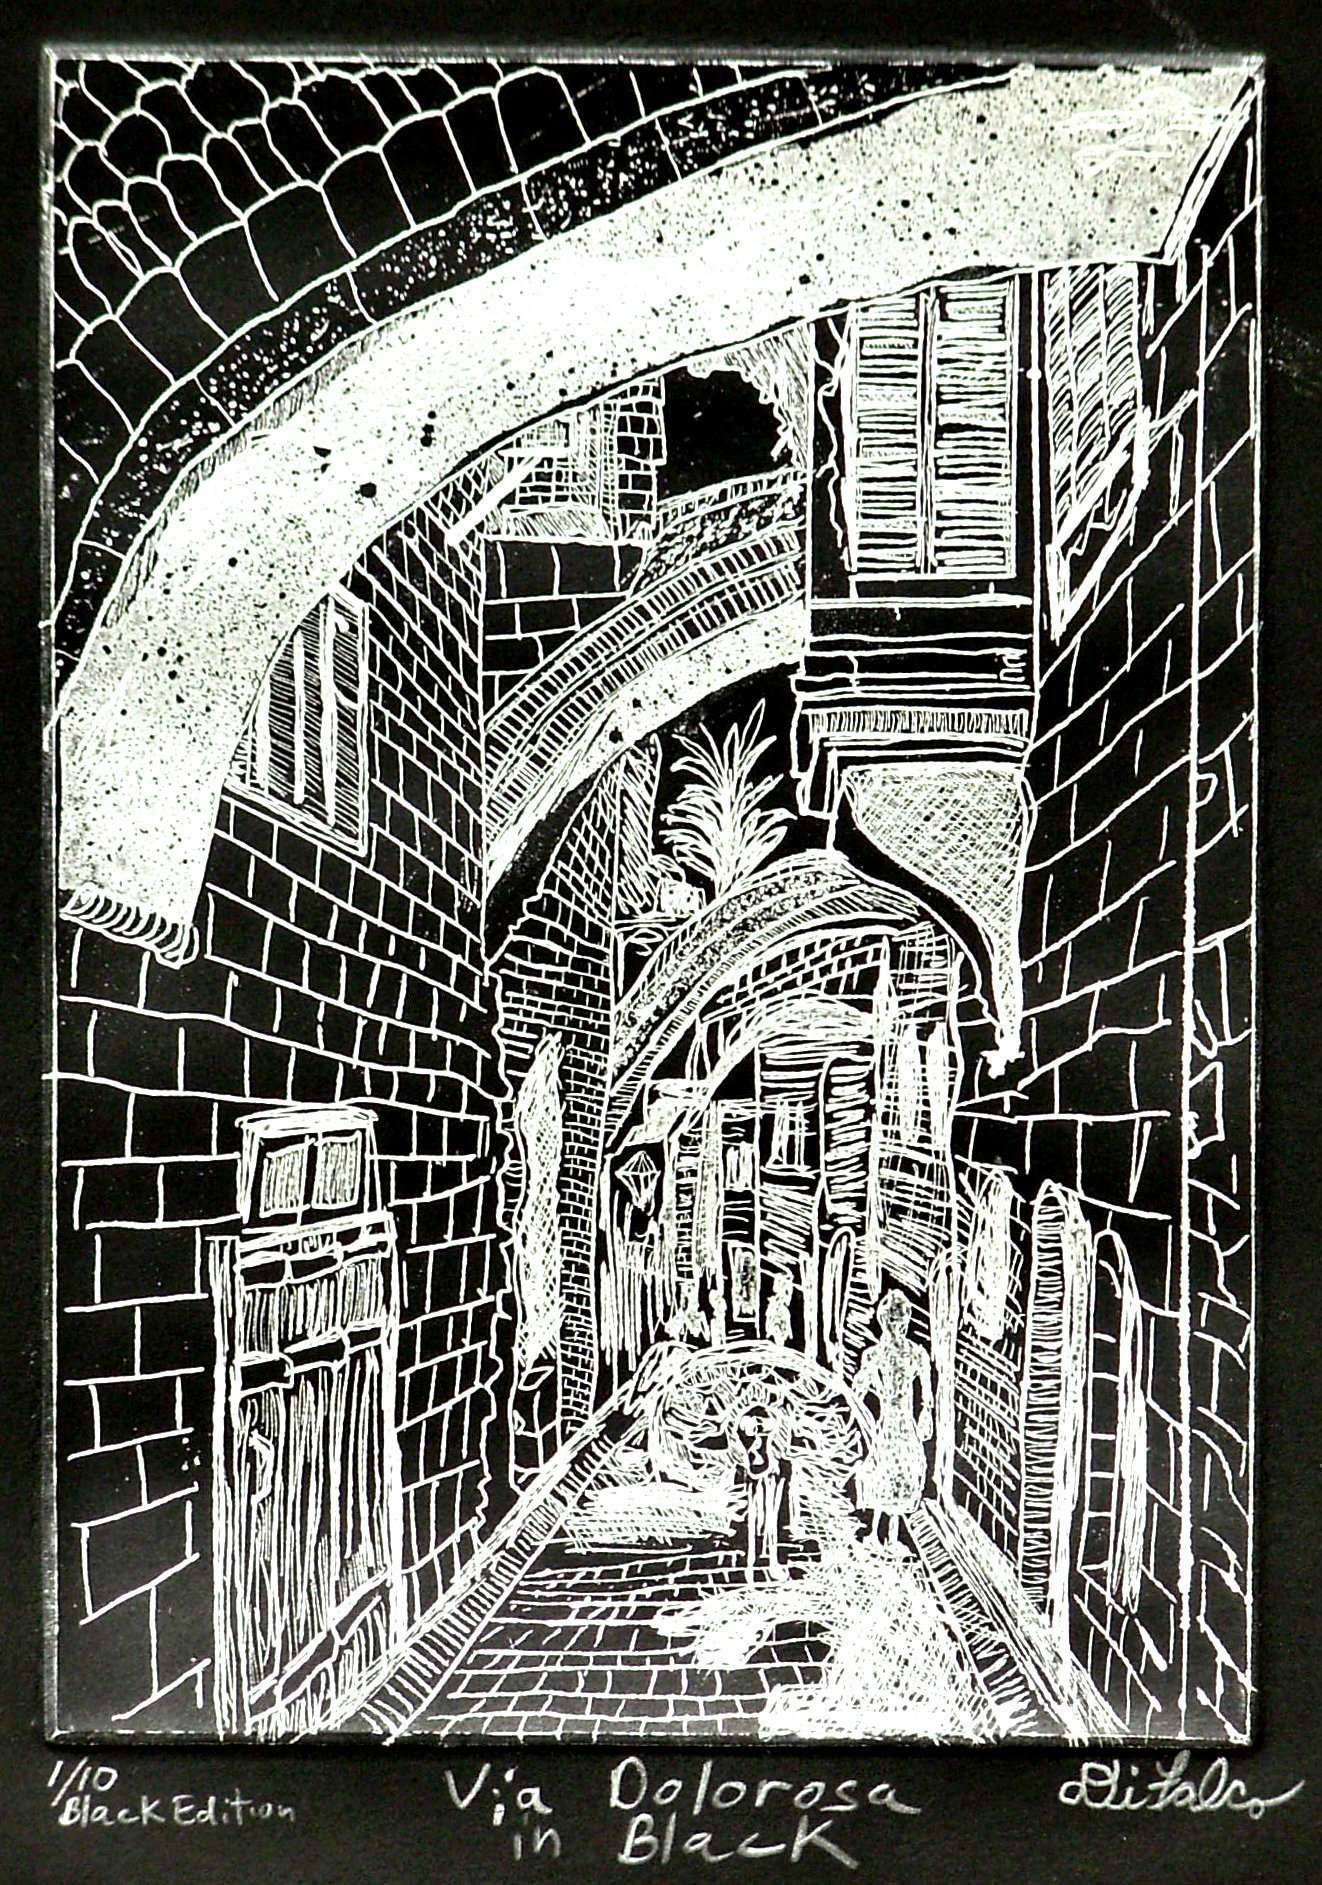 Jerry  Di Falco: 'VIA DOLOROSA in black', 2010 Etching, Christian. This print is from my series entitled MYSTERIOUS PLACES AND SACRED SPACES. The etching techniques include intaglio, aquatint and drypoint. This work is from twolimited editions of only ten prints per edition in my own blend of oil- based inkss printed on Stonehenge black paper. The image represents one of ...